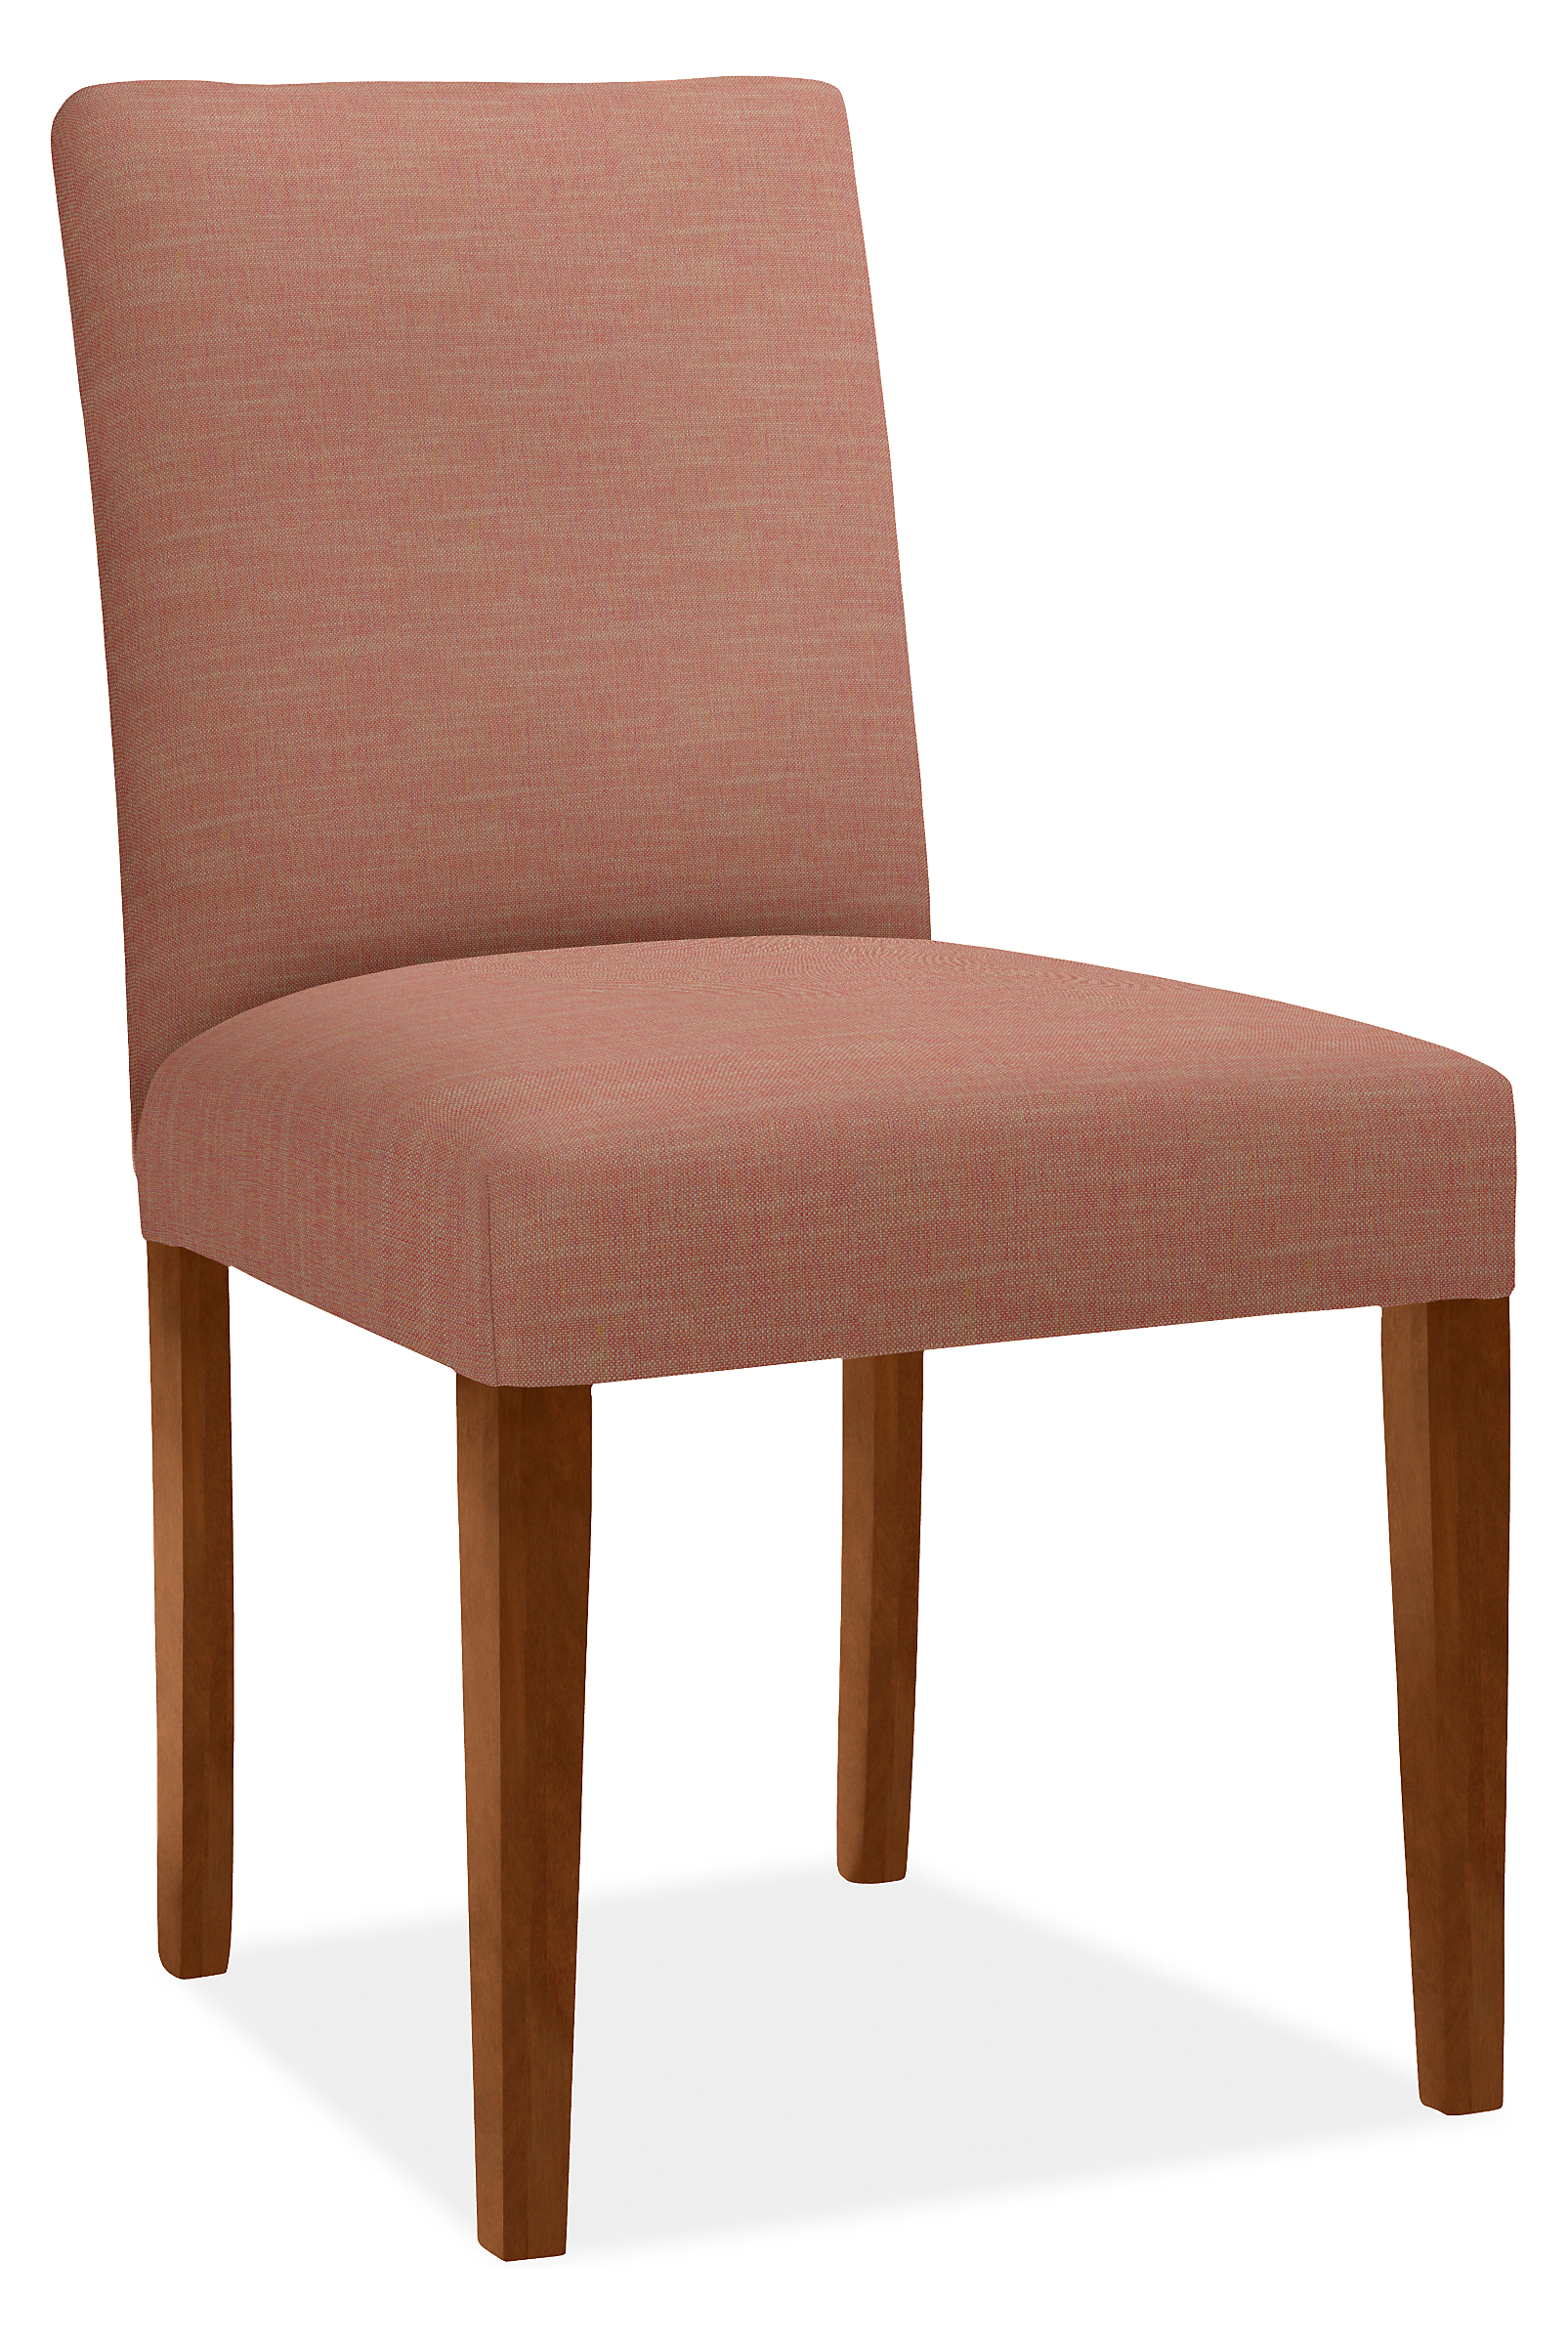 Peyton Side Chair in Destin Coral with Mocha Legs